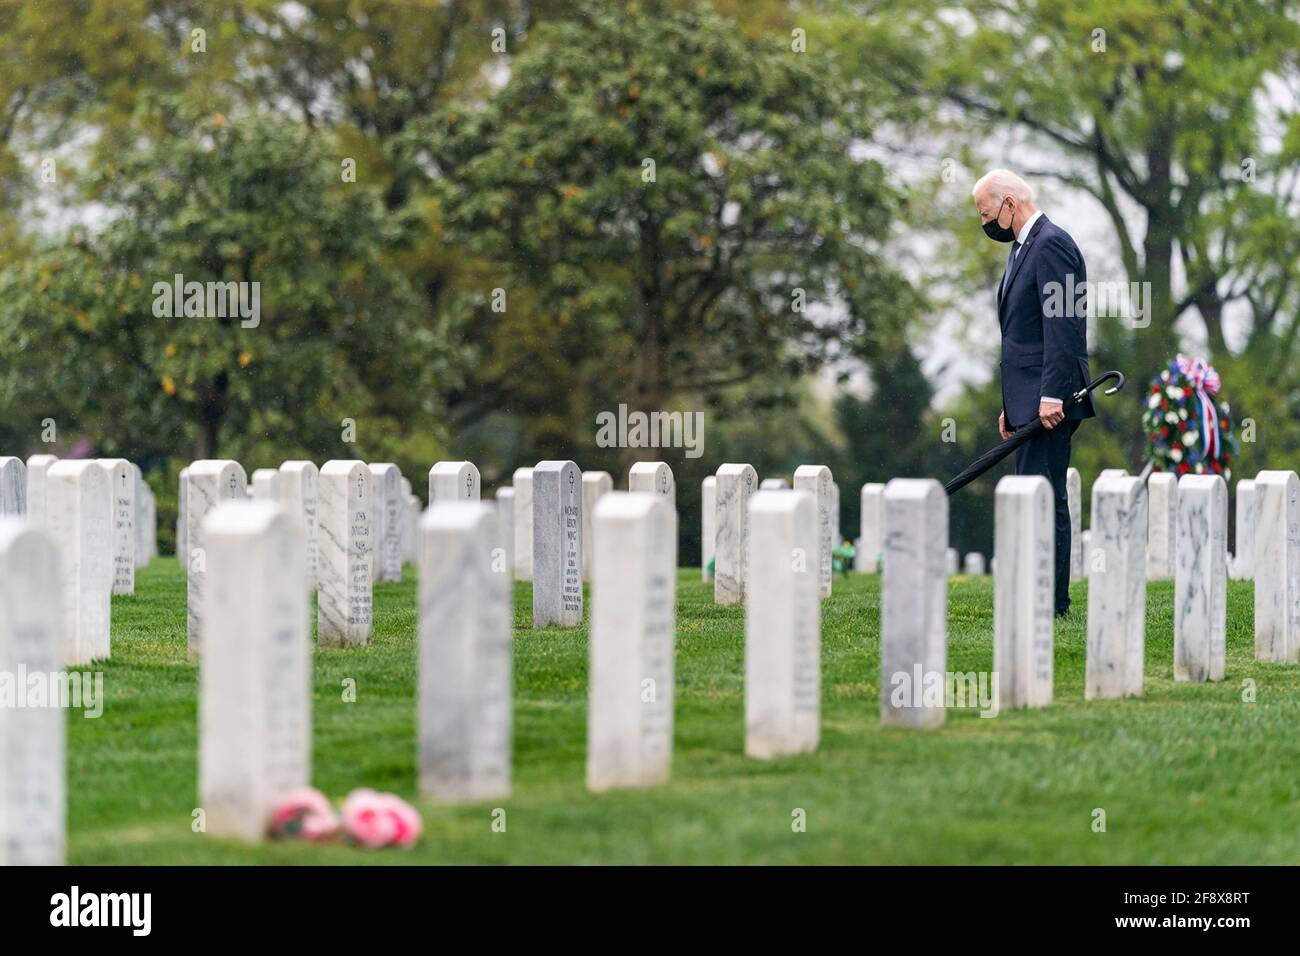 Arlington, United States Of America. 15th Apr, 2021. U.S President Joe Biden walks past graves in Section 60 at Arlington National Cemetery as he pays respect to service members who died in the Afghan and Iraq wars April 14, 2021 in Arlington, Virginia. Earlier Biden announced that he will be withdrawing all forces from Afghanistan by September 11th. Credit: Planetpix/Alamy Live News Stock Photo